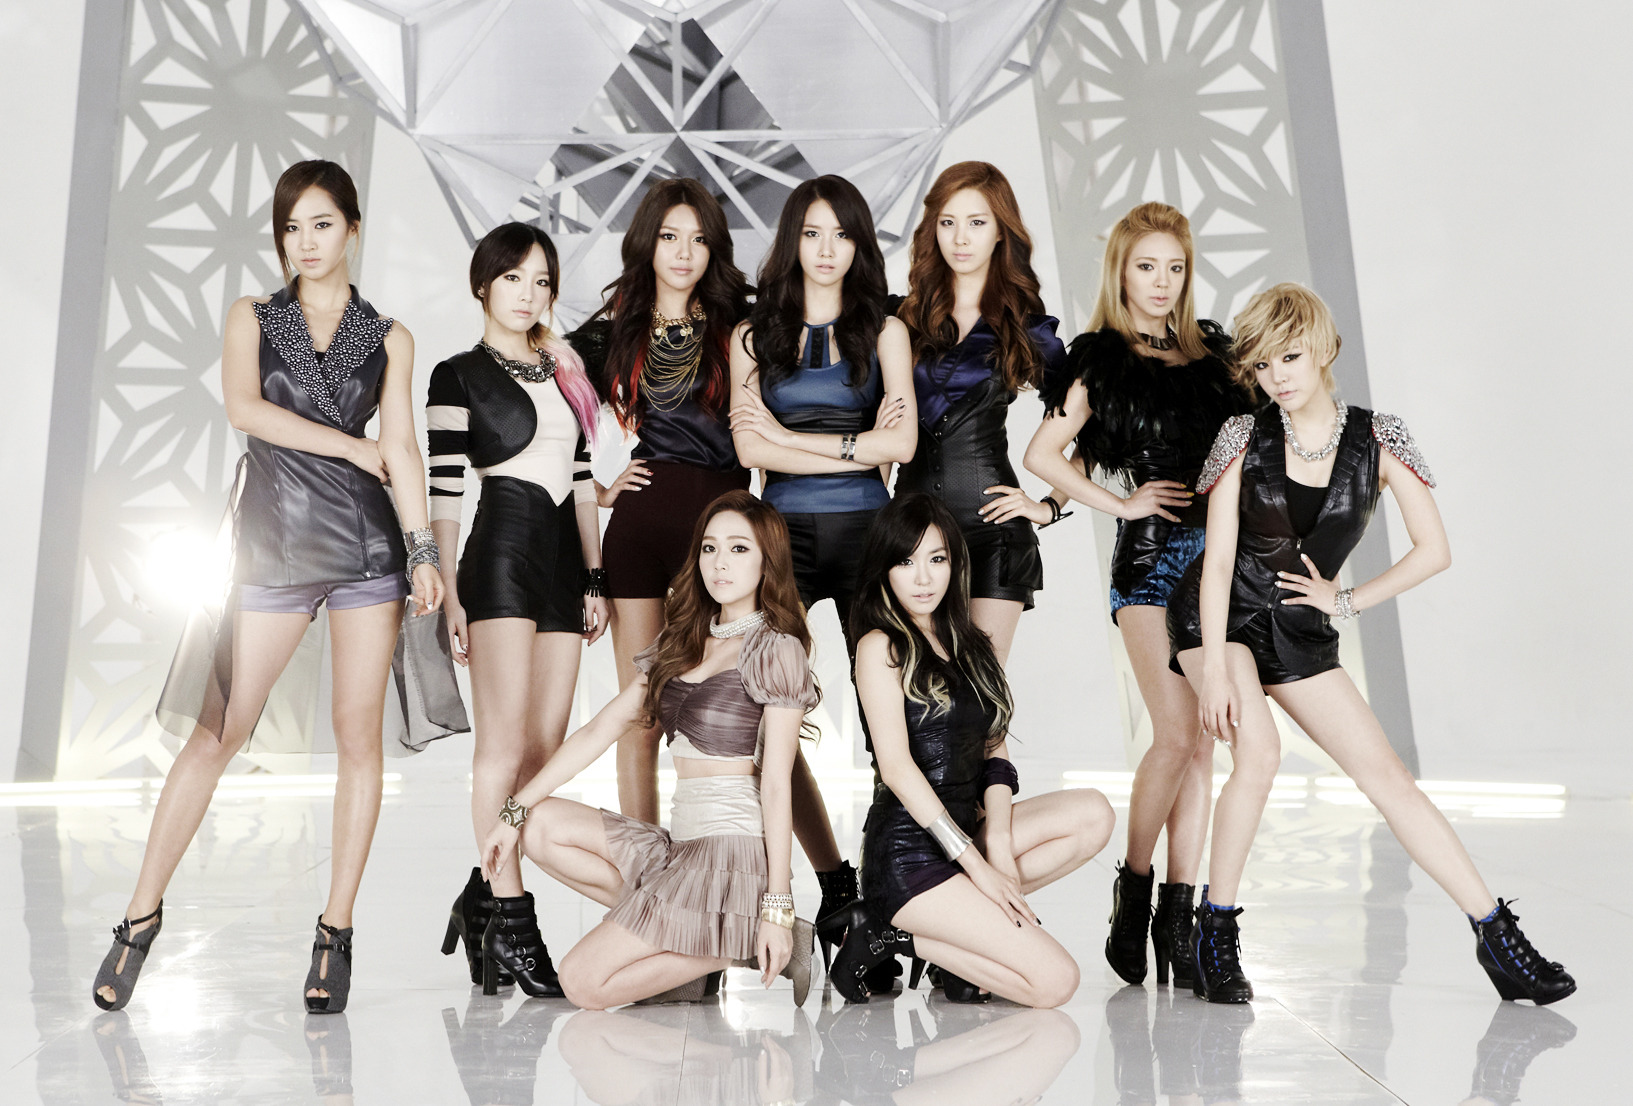 Girls’ Generation: Release Dance Practice Video for “The Boys 